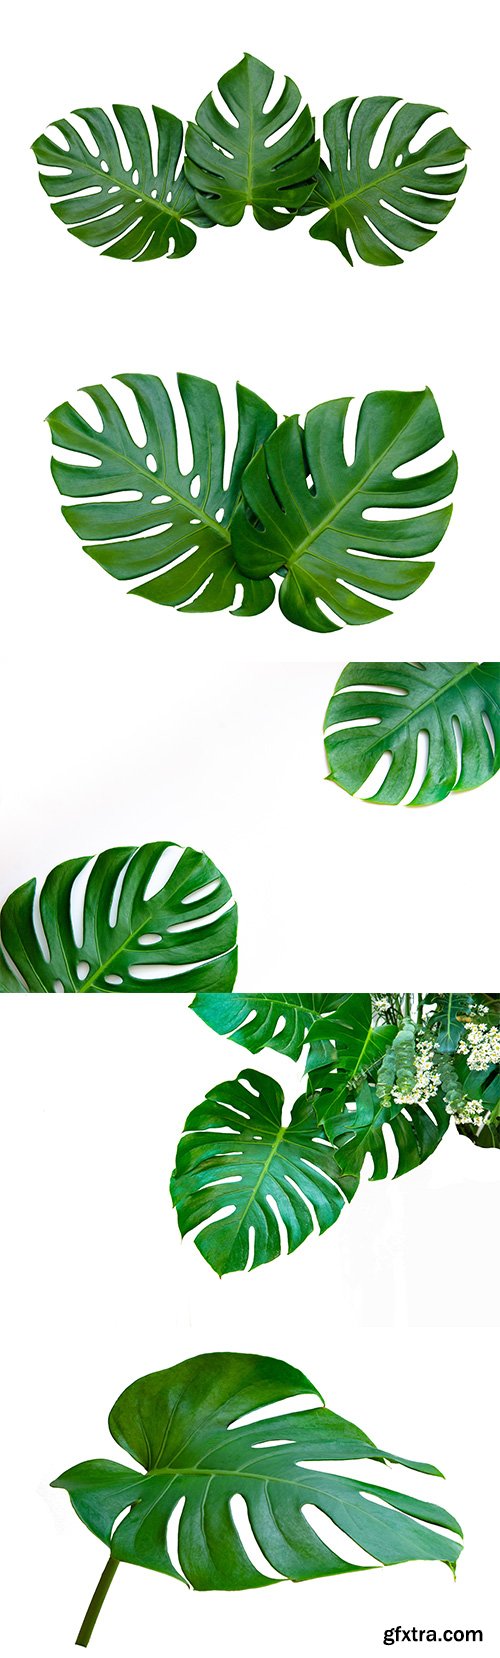 Monstera Leaves Isolated - 10xJPGs